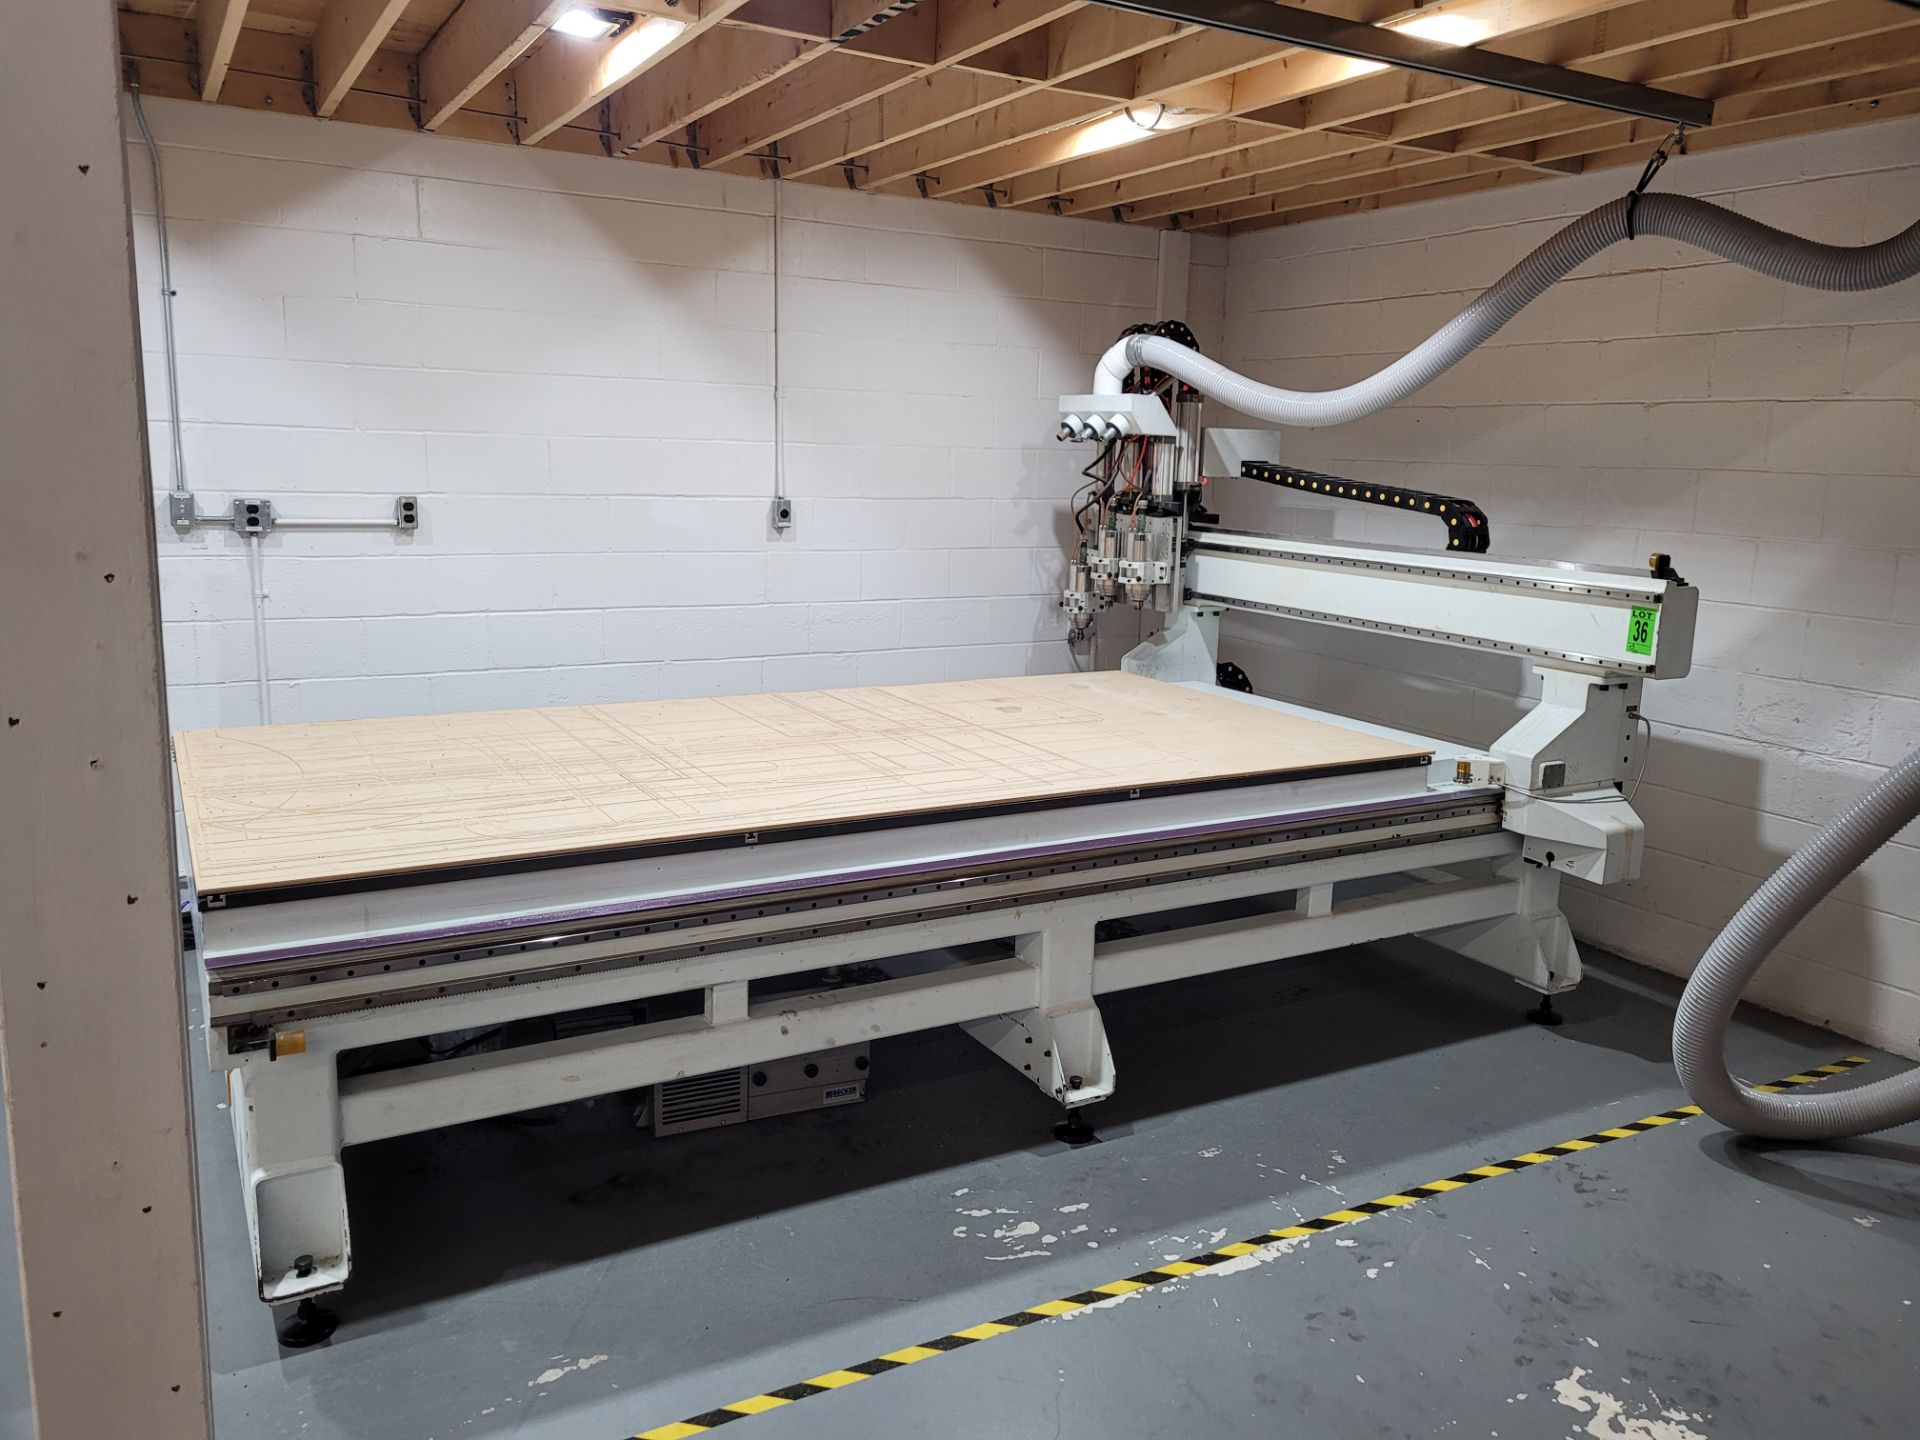 2015 SUDA ATC CNC Router mod. MG1630C, 3-Head System with Accessories and CRAFTEX mod. FM-300 Collec - Image 38 of 51